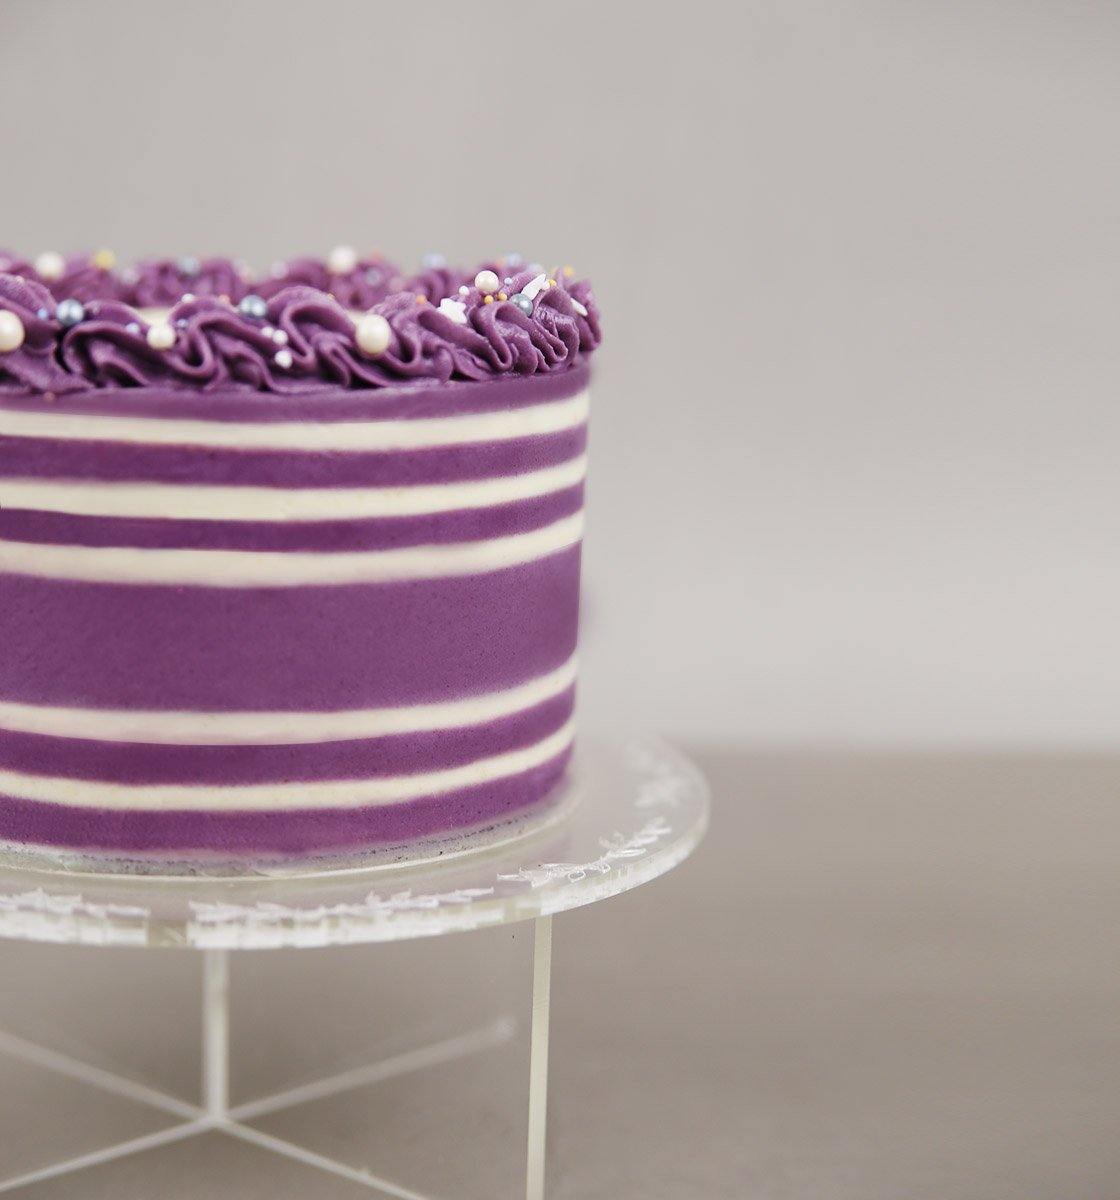 The Tidy One - Cake Comb - Inspired Baking 